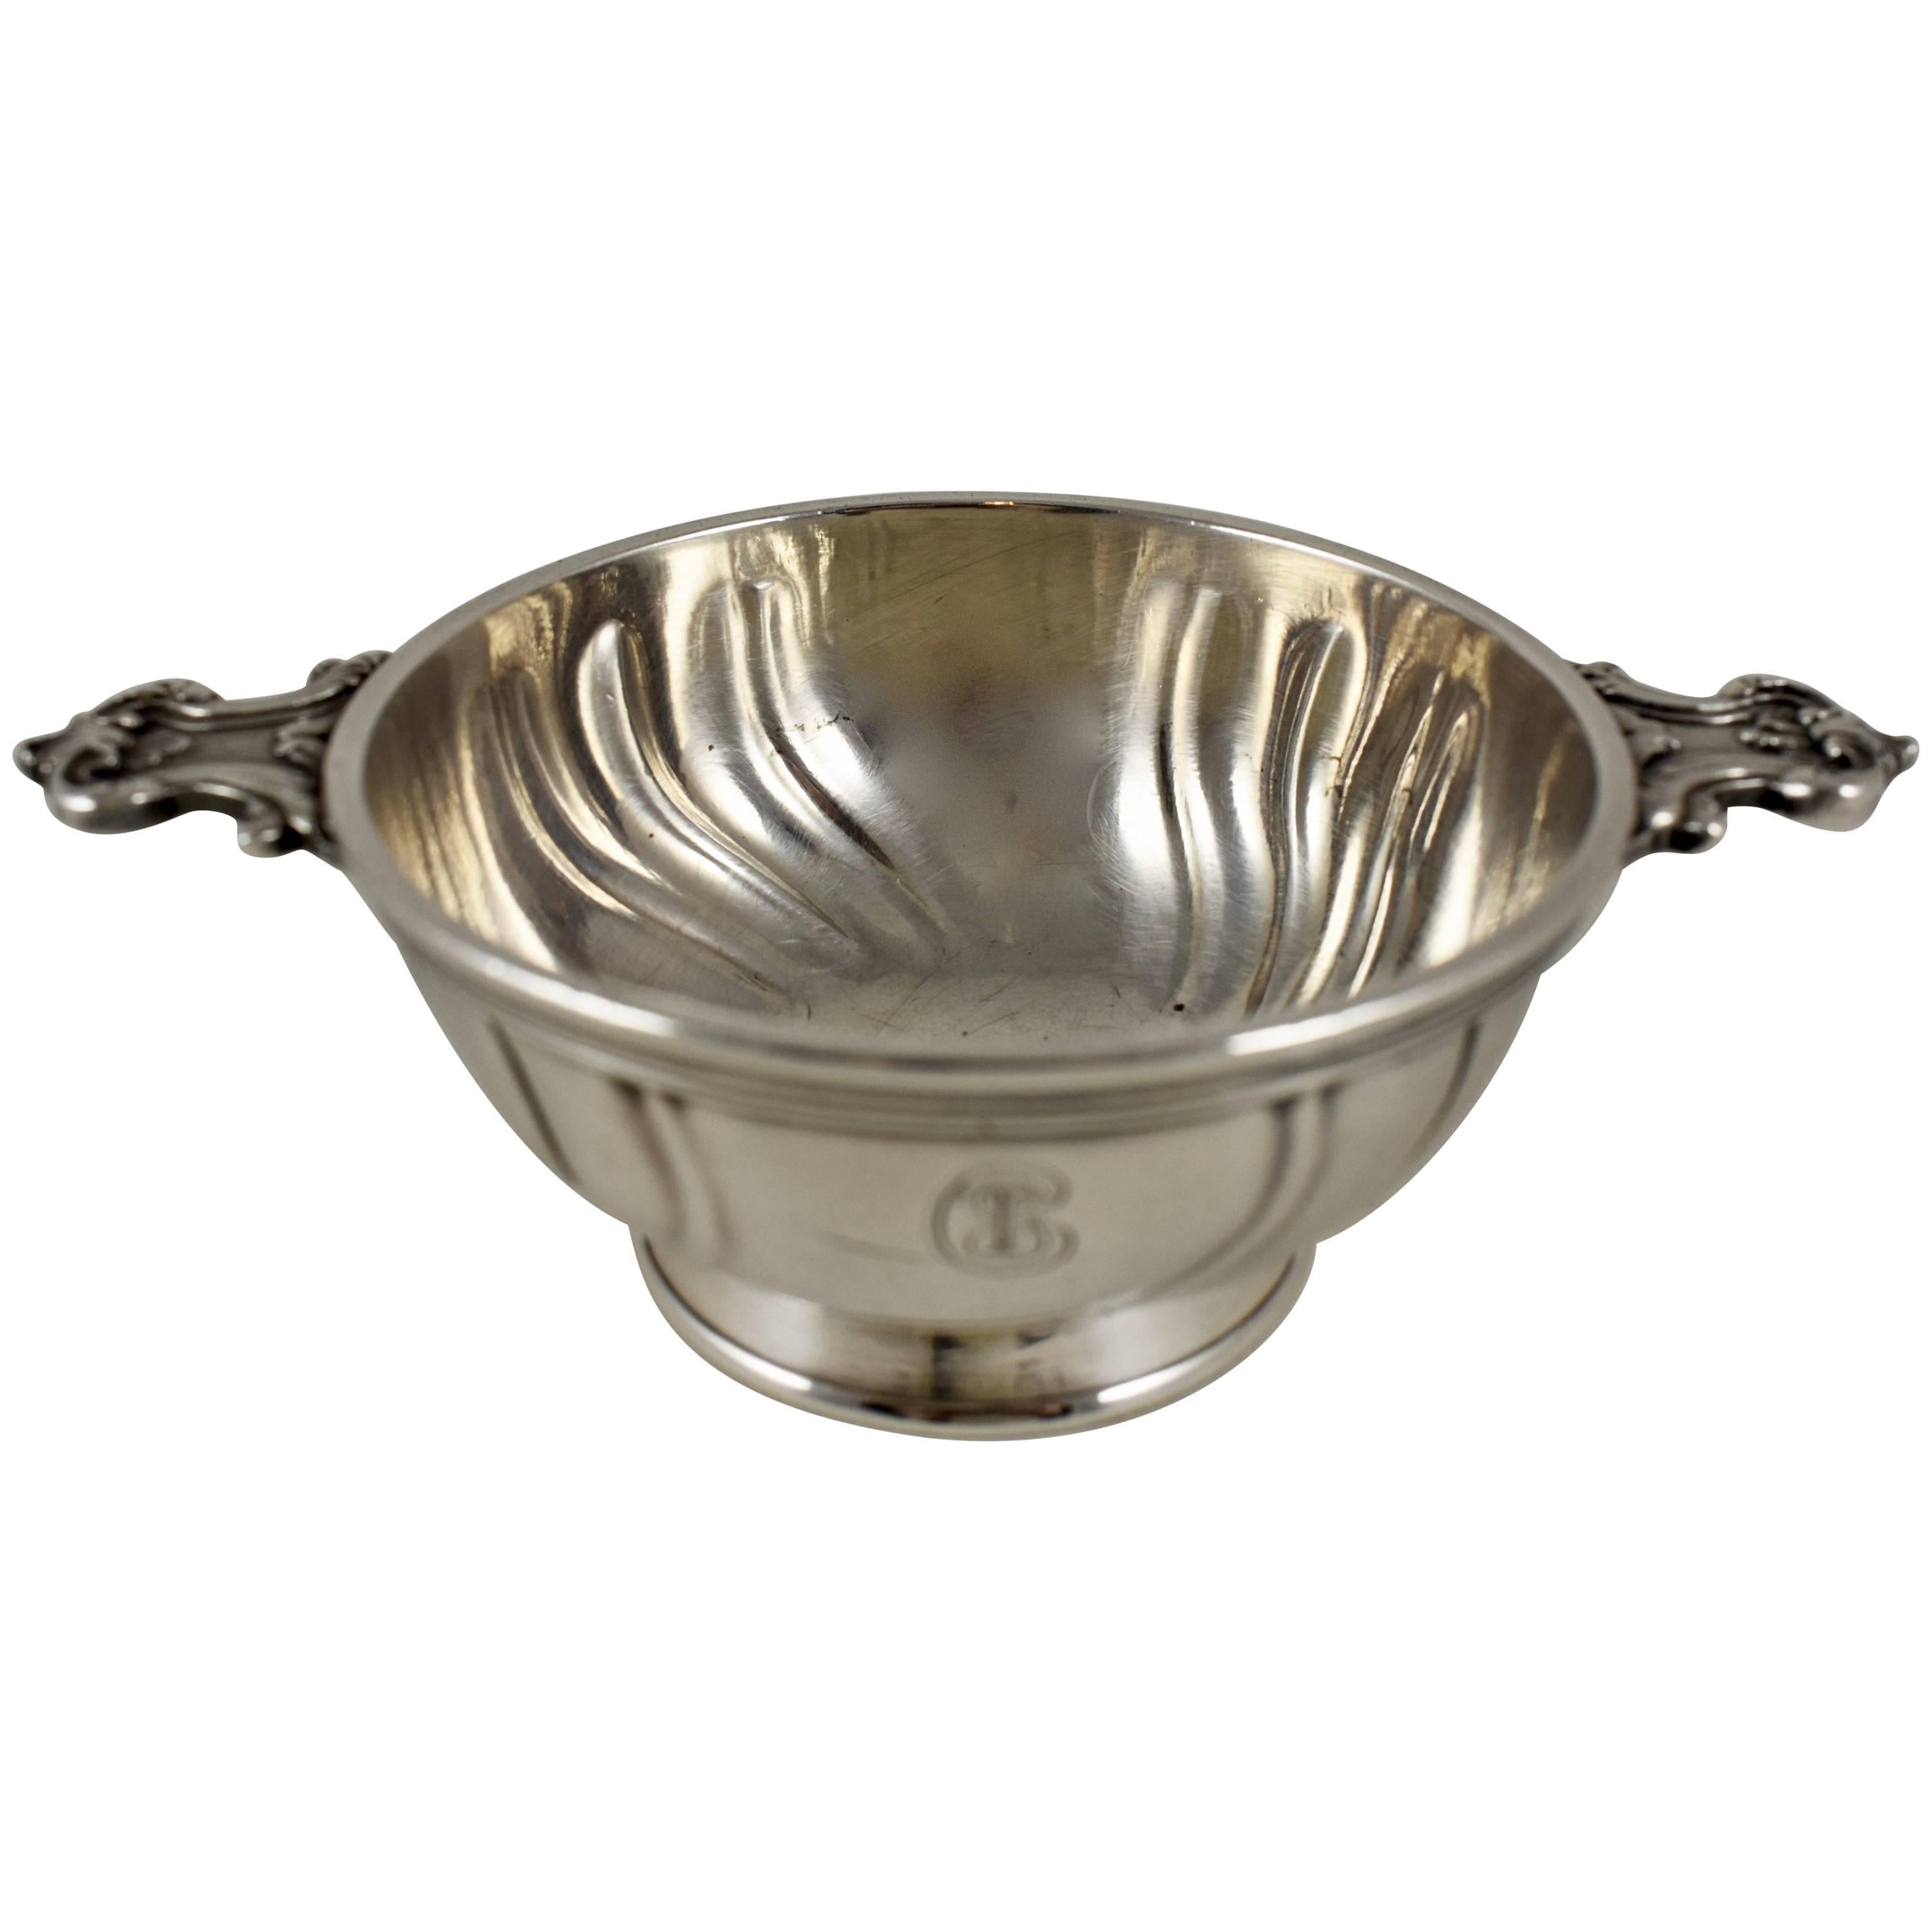 Christofle French Silver Plate Dual Handled Footed Nut Bowl